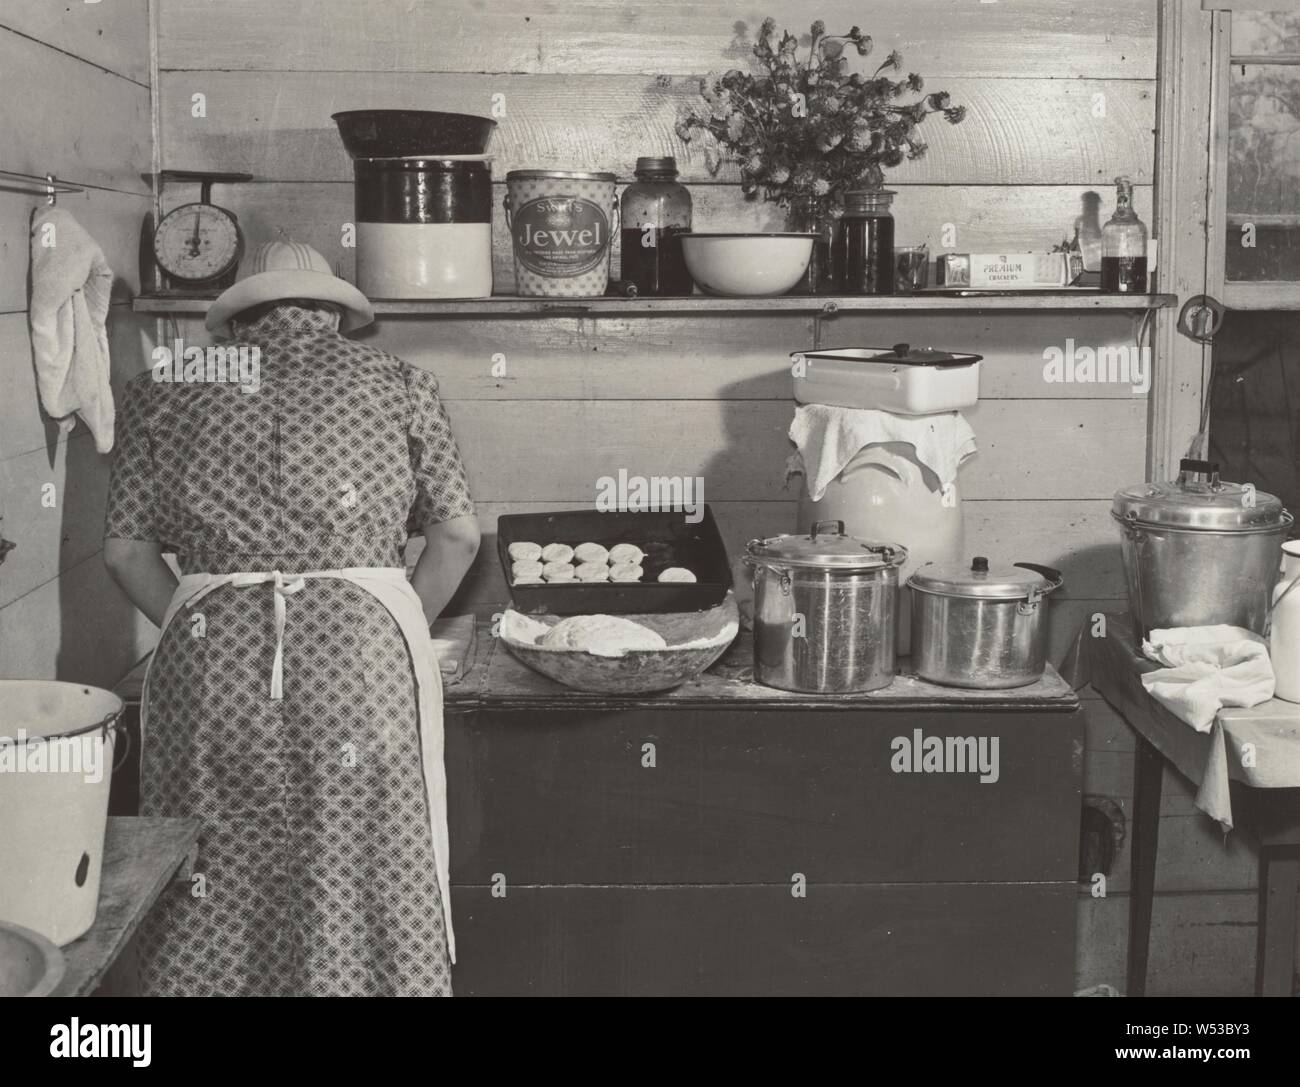 One of the Wilkins family making biscuits for dinner on cornshucking day at Mrs. Fred Wilkins' home near Tallyho, Granville County. North Carolina, Marion Post Wolcott (American, 1910 - 1990), North Carolina, Granville County, United States, September 1939, Gelatin silver print, 21.2 × 28 cm (8 3/8 × 11 in Stock Photo